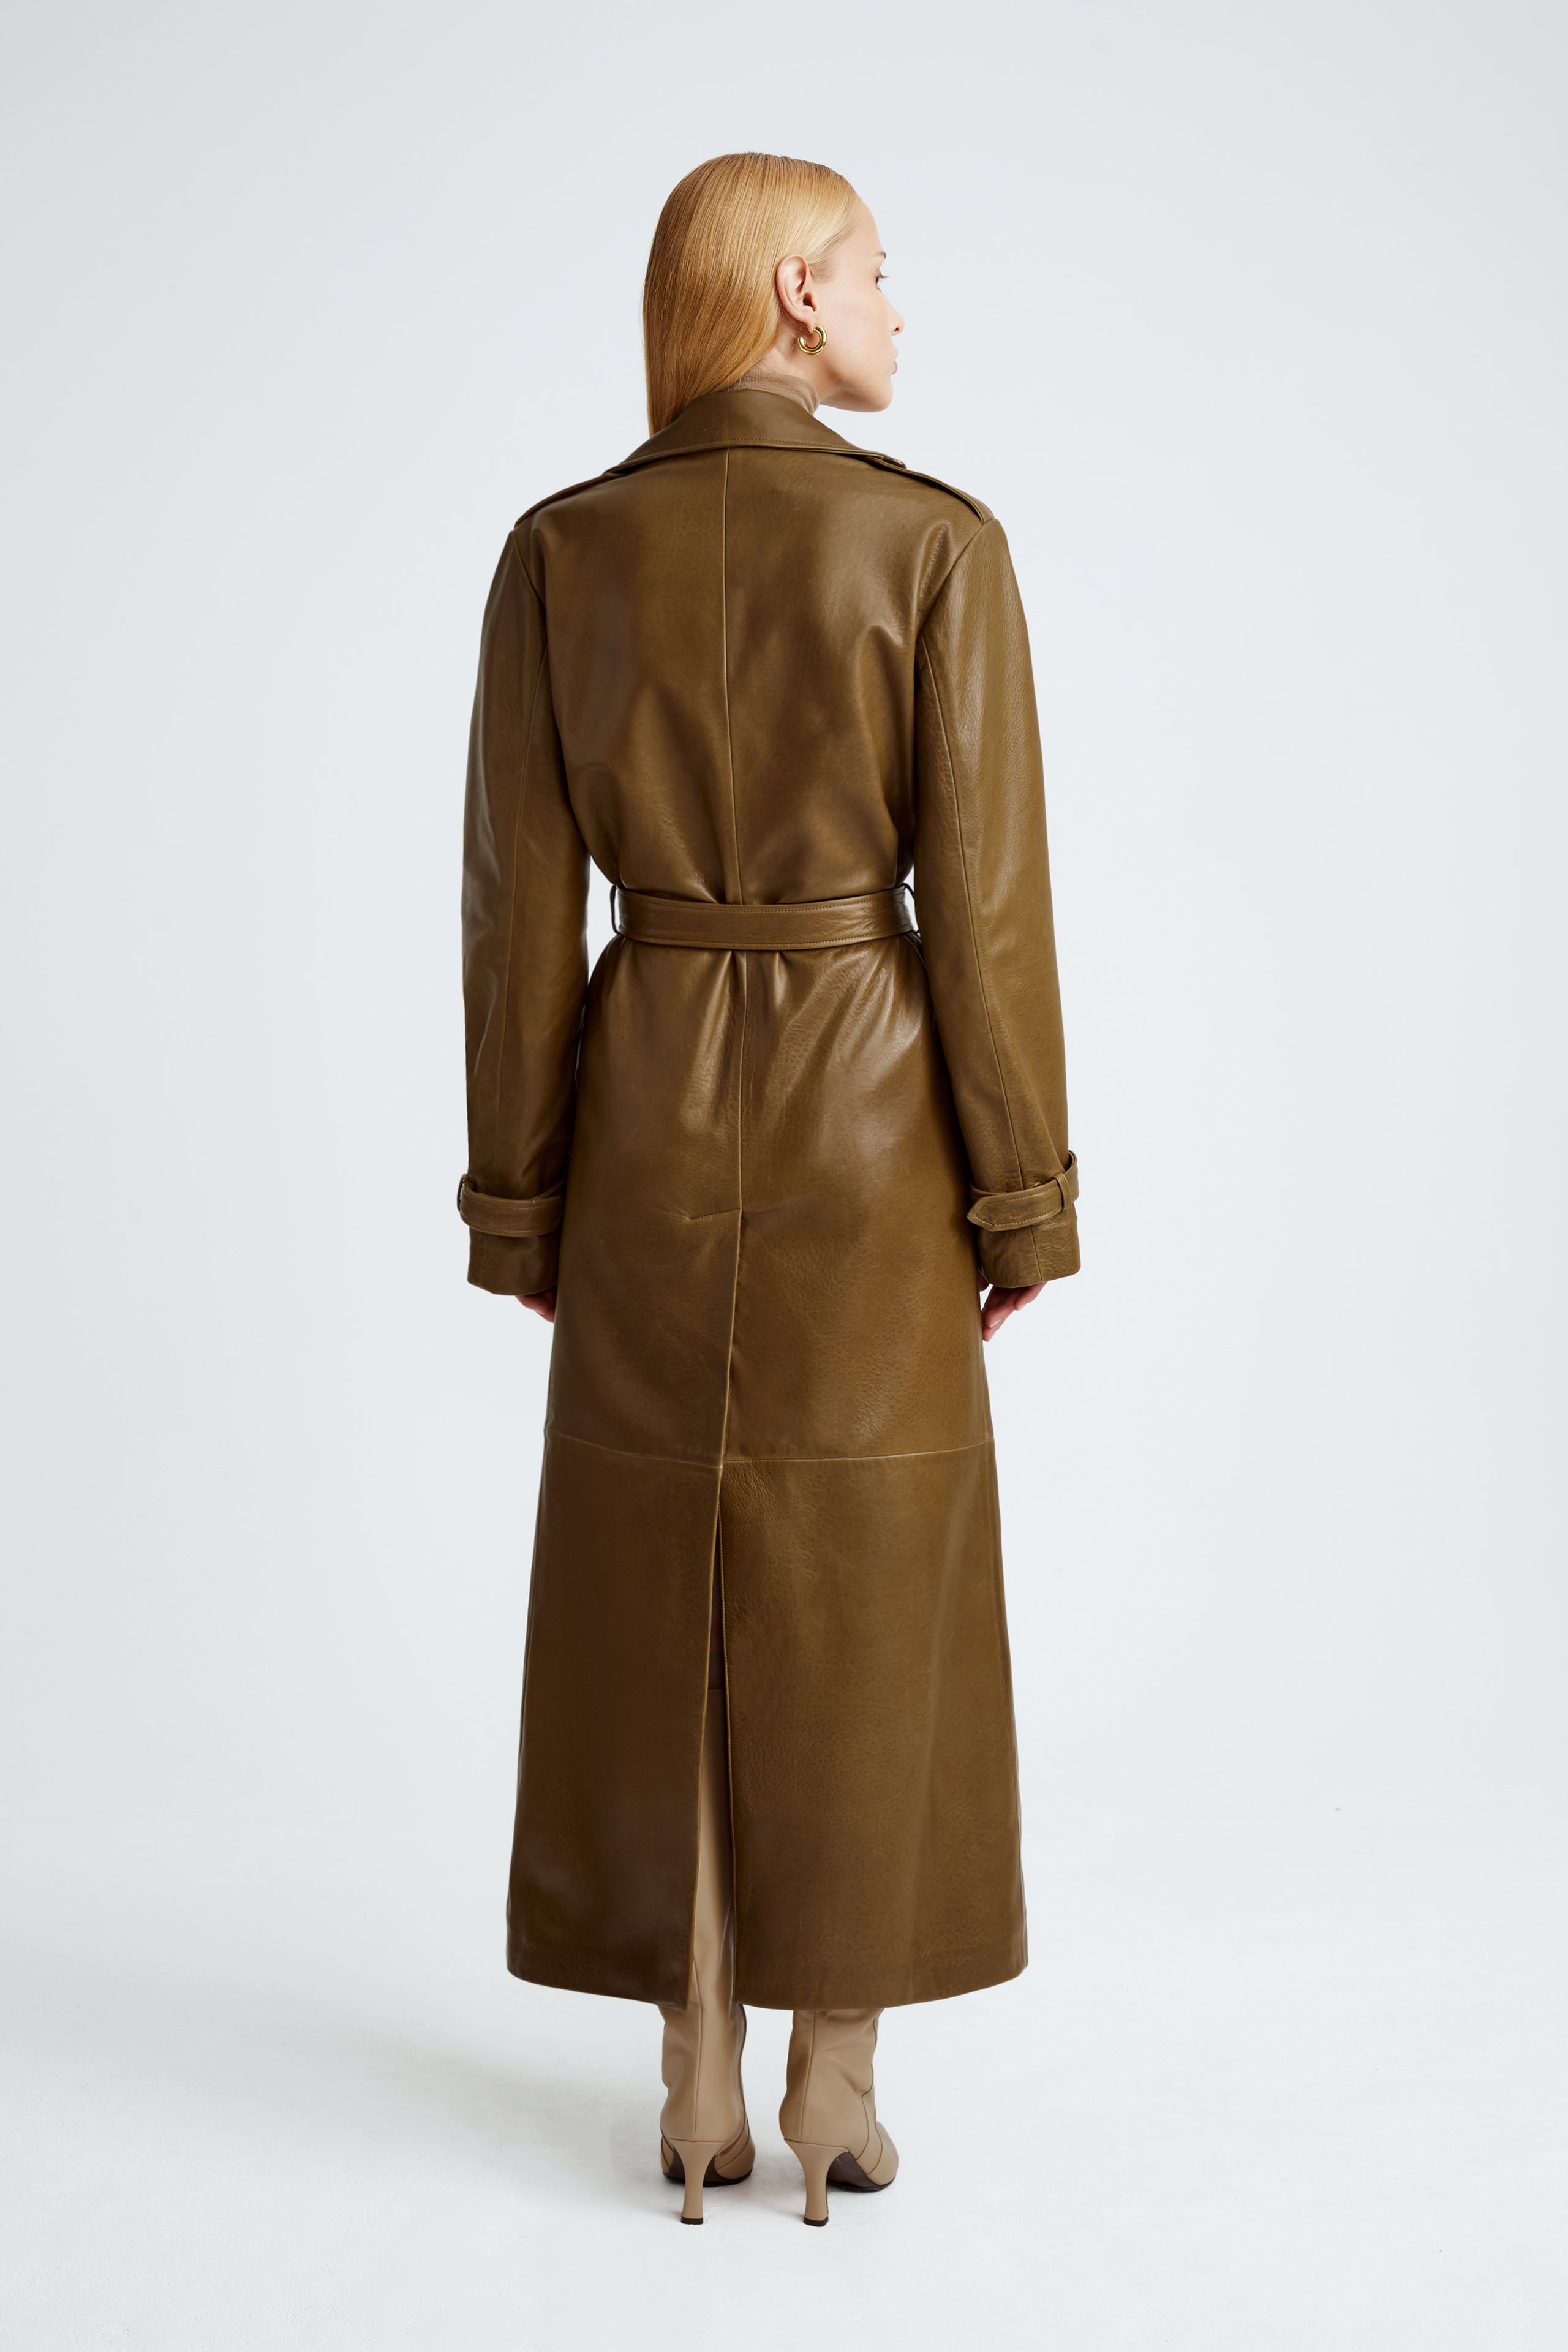 Model is wearing the Haya Zeytoun Belted Leather Trench Coat Back